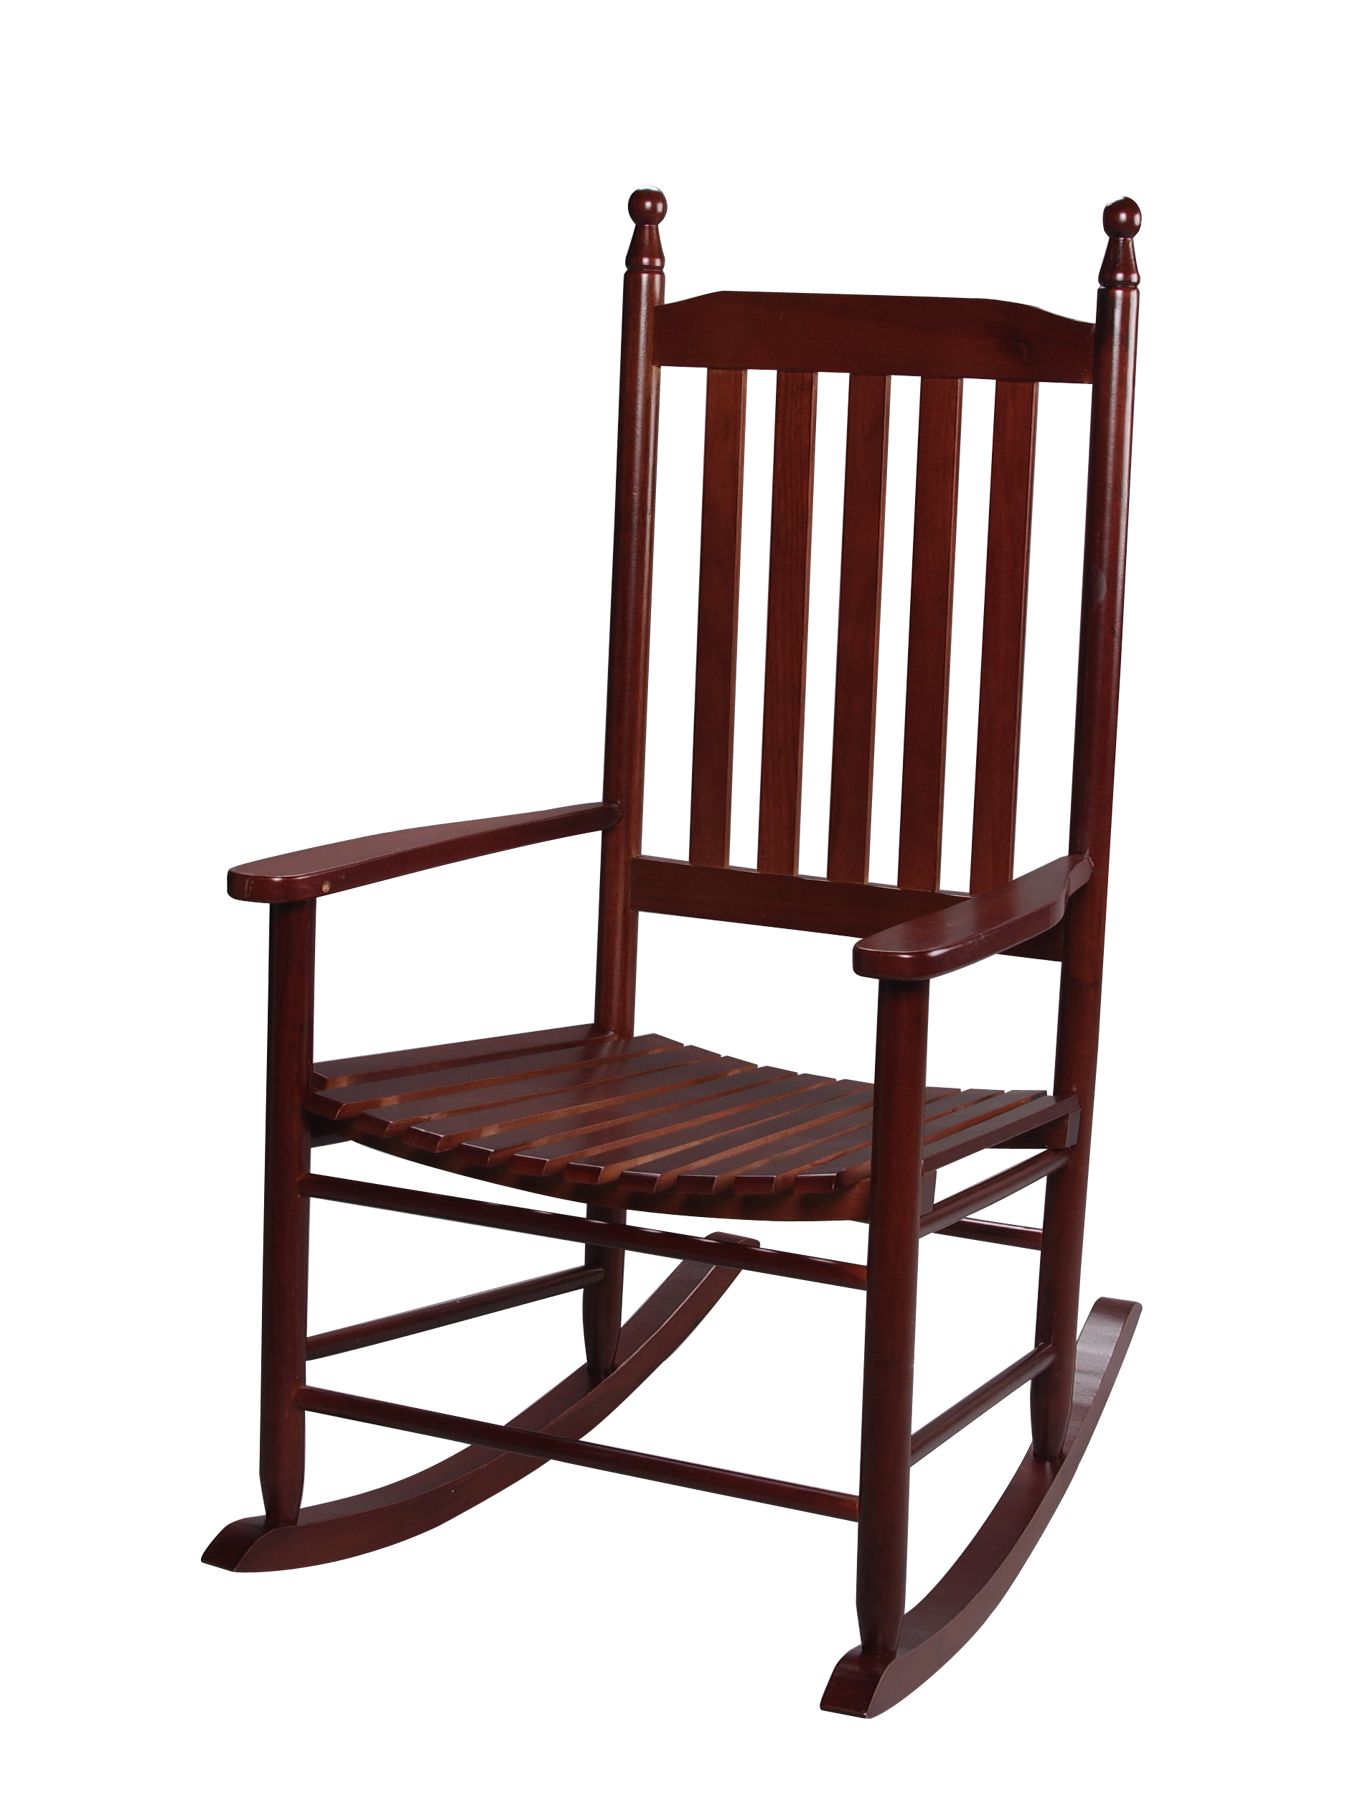 Gift Mark 3400C Tall Back Adult Rocking Chair - Cherry